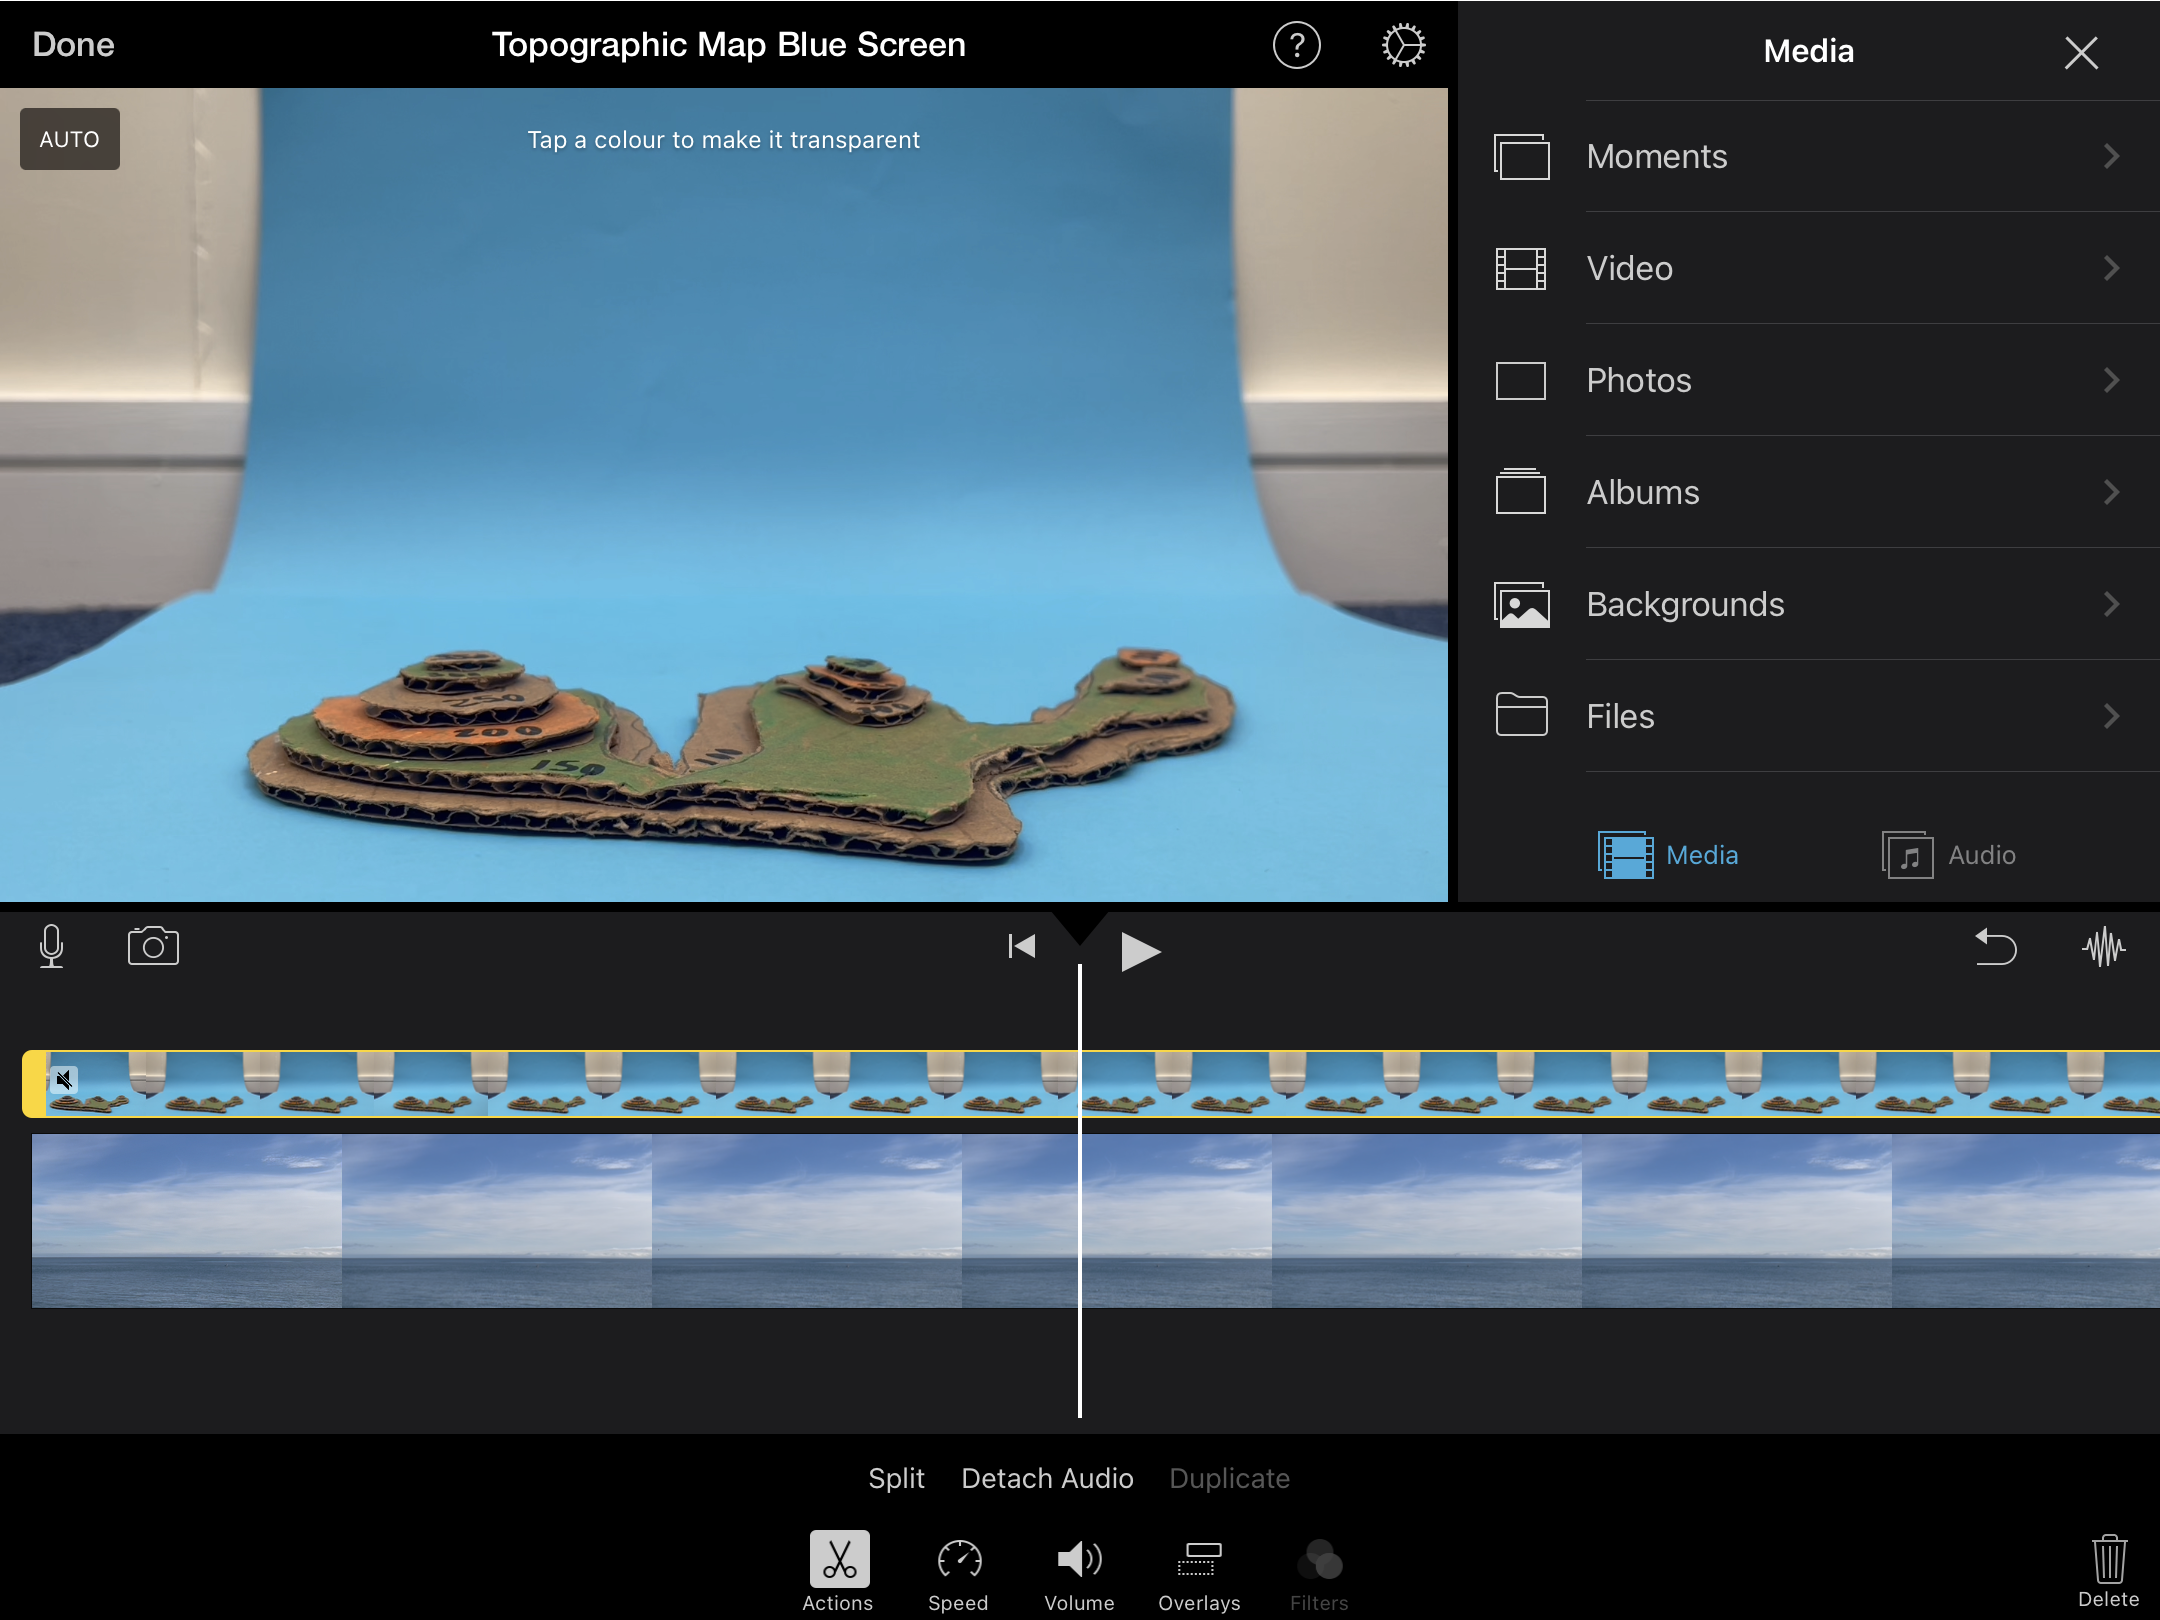 Screenshot from iMovie for iPad. A cardboard topographic map on blue paper has been added to as an overlay image.